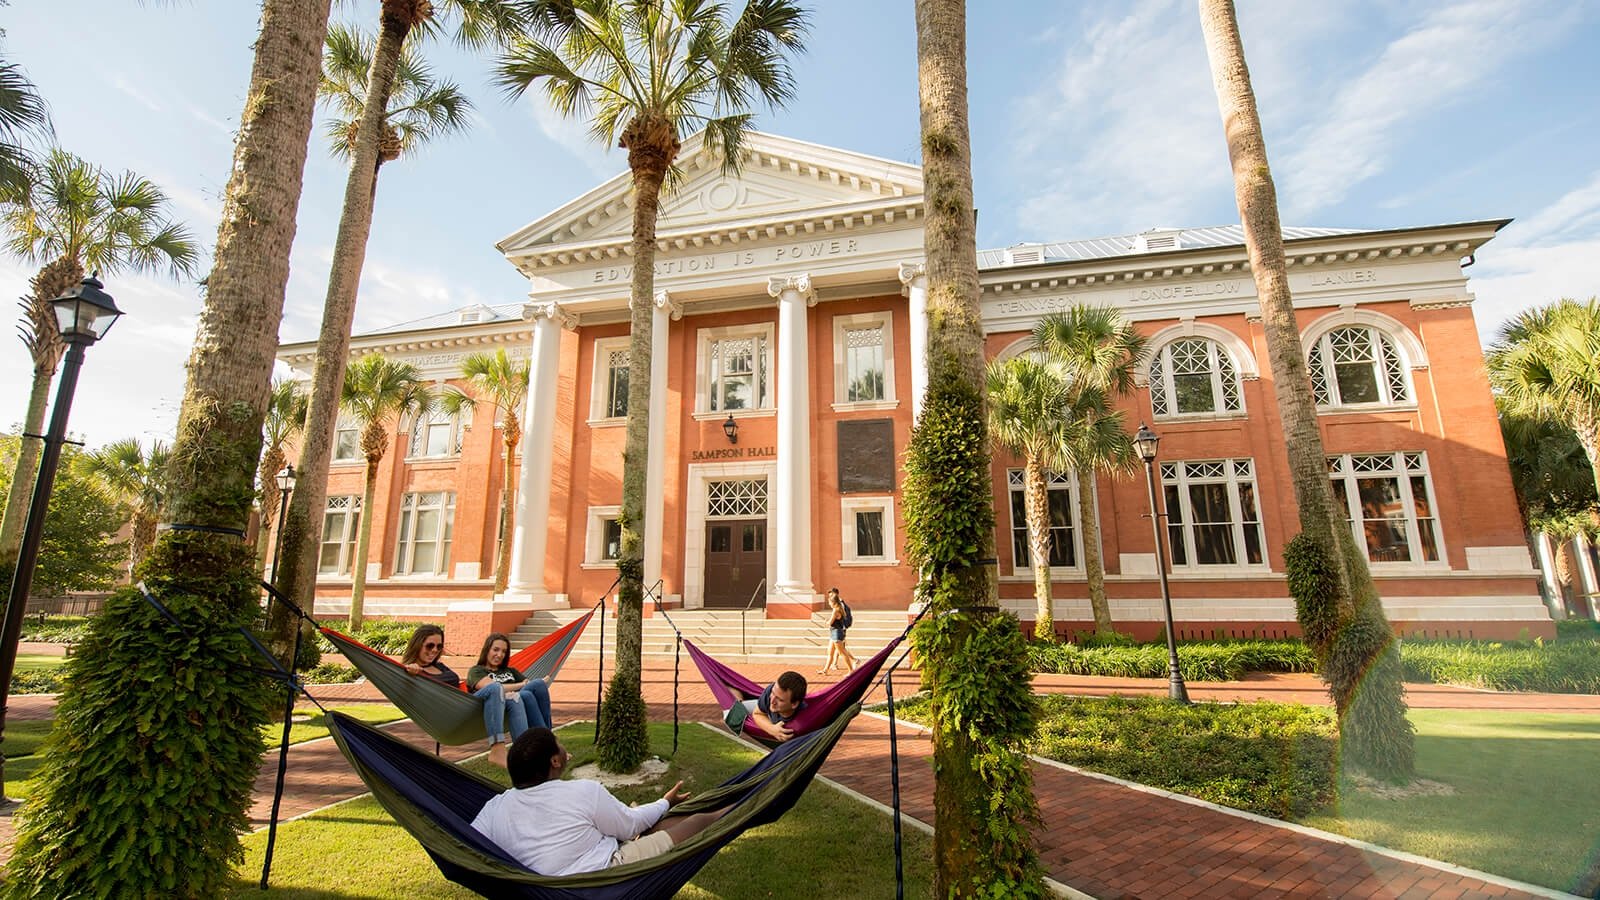 Students in hammocks at the Palm Court